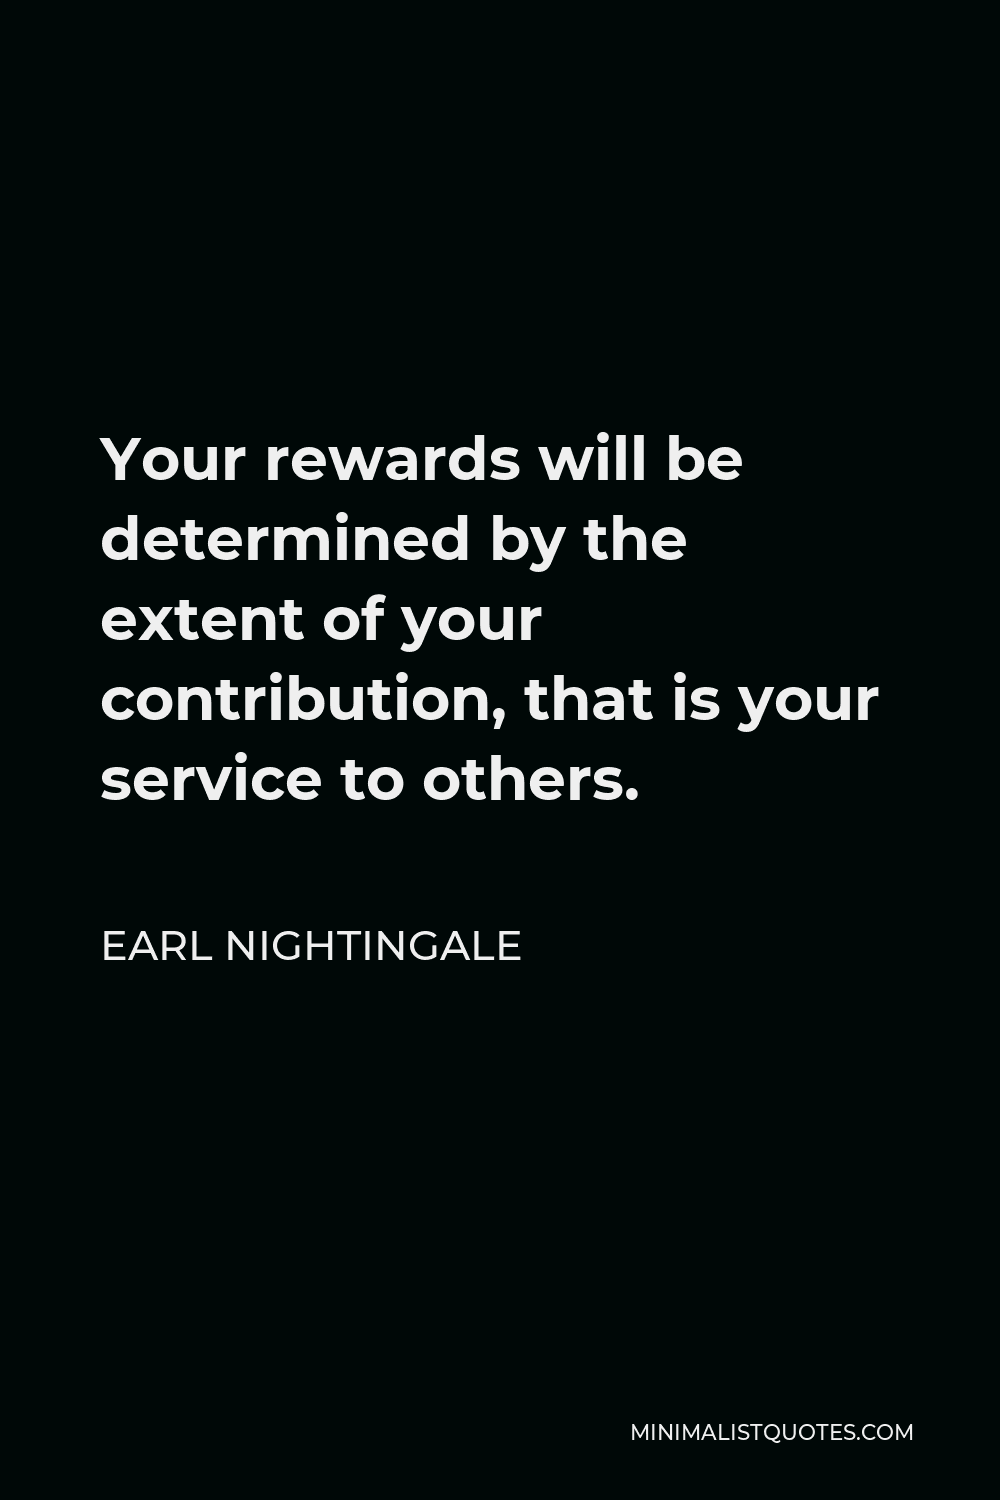 Earl Nightingale Quote - Your rewards will be determined by the extent of your contribution, that is your service to others.